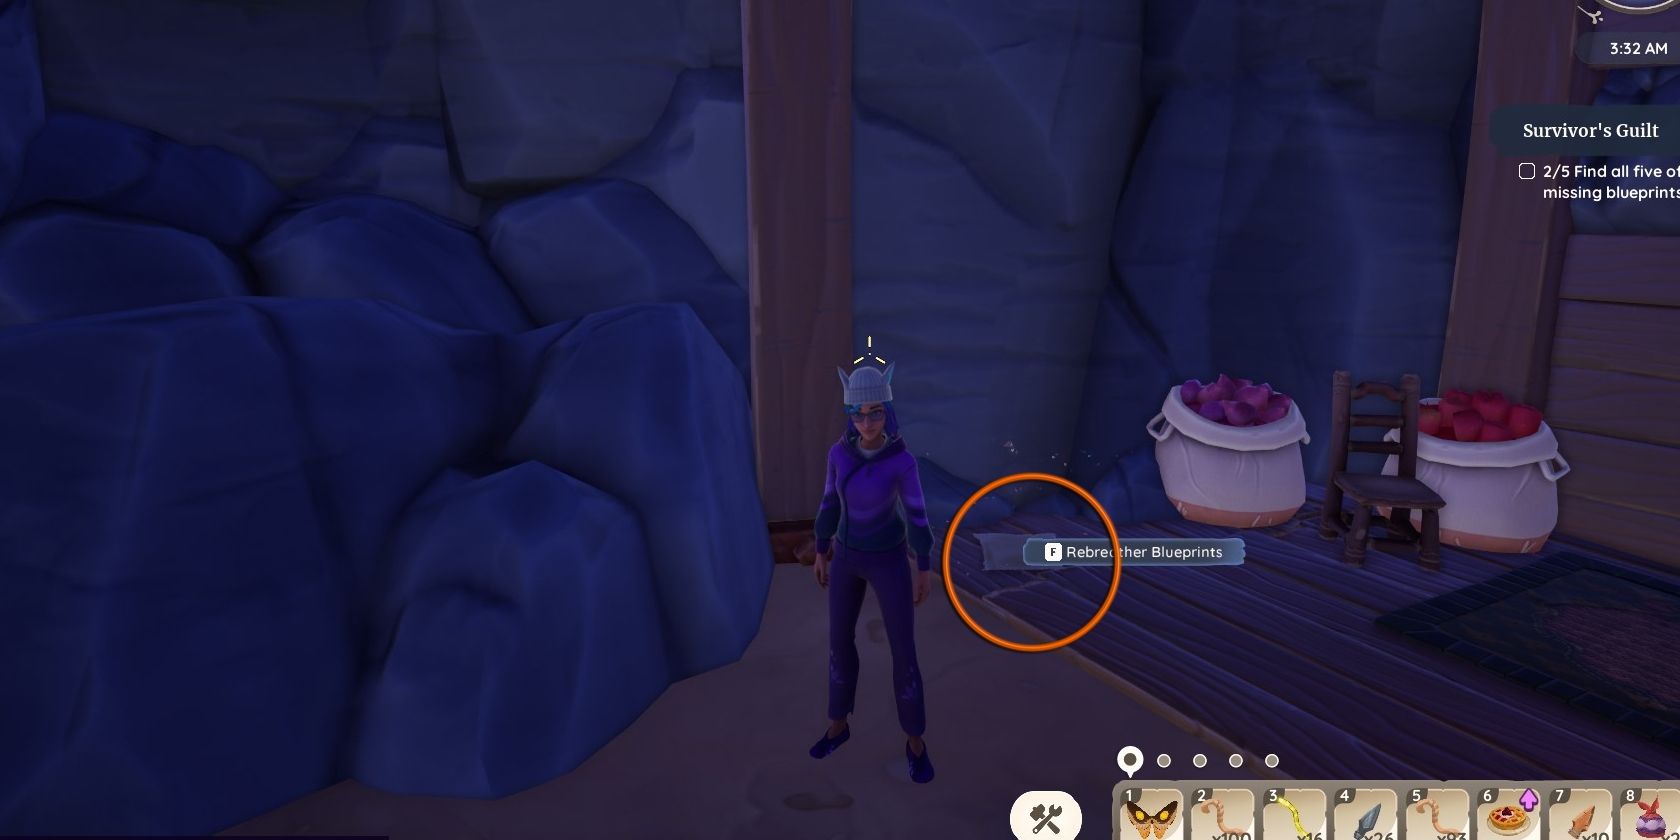 Palia blueprint location in underground geyser next to avatar. Blueprints are circled in orange and next to a chair with storage sacks full of produce.